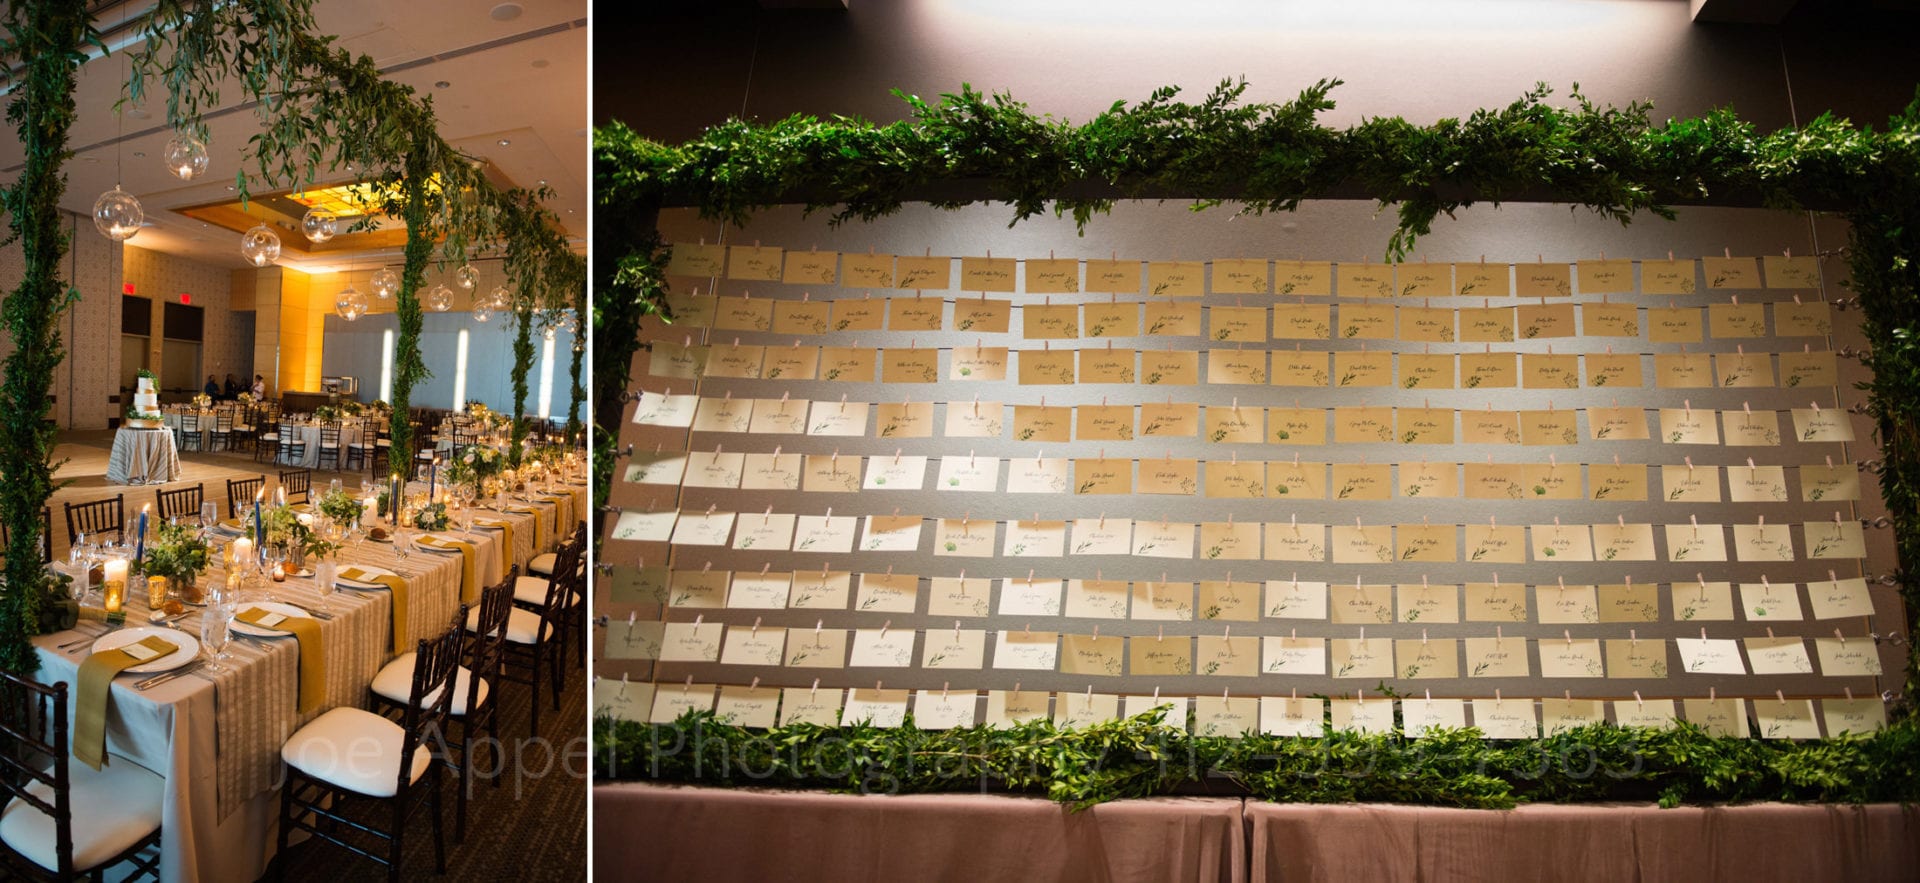 greenery on a trellis above a table set for a banquet. Place cards hang on wires suspended from a trellis covered with greenery Fairmont Hotel Pittsburgh Weddings. 